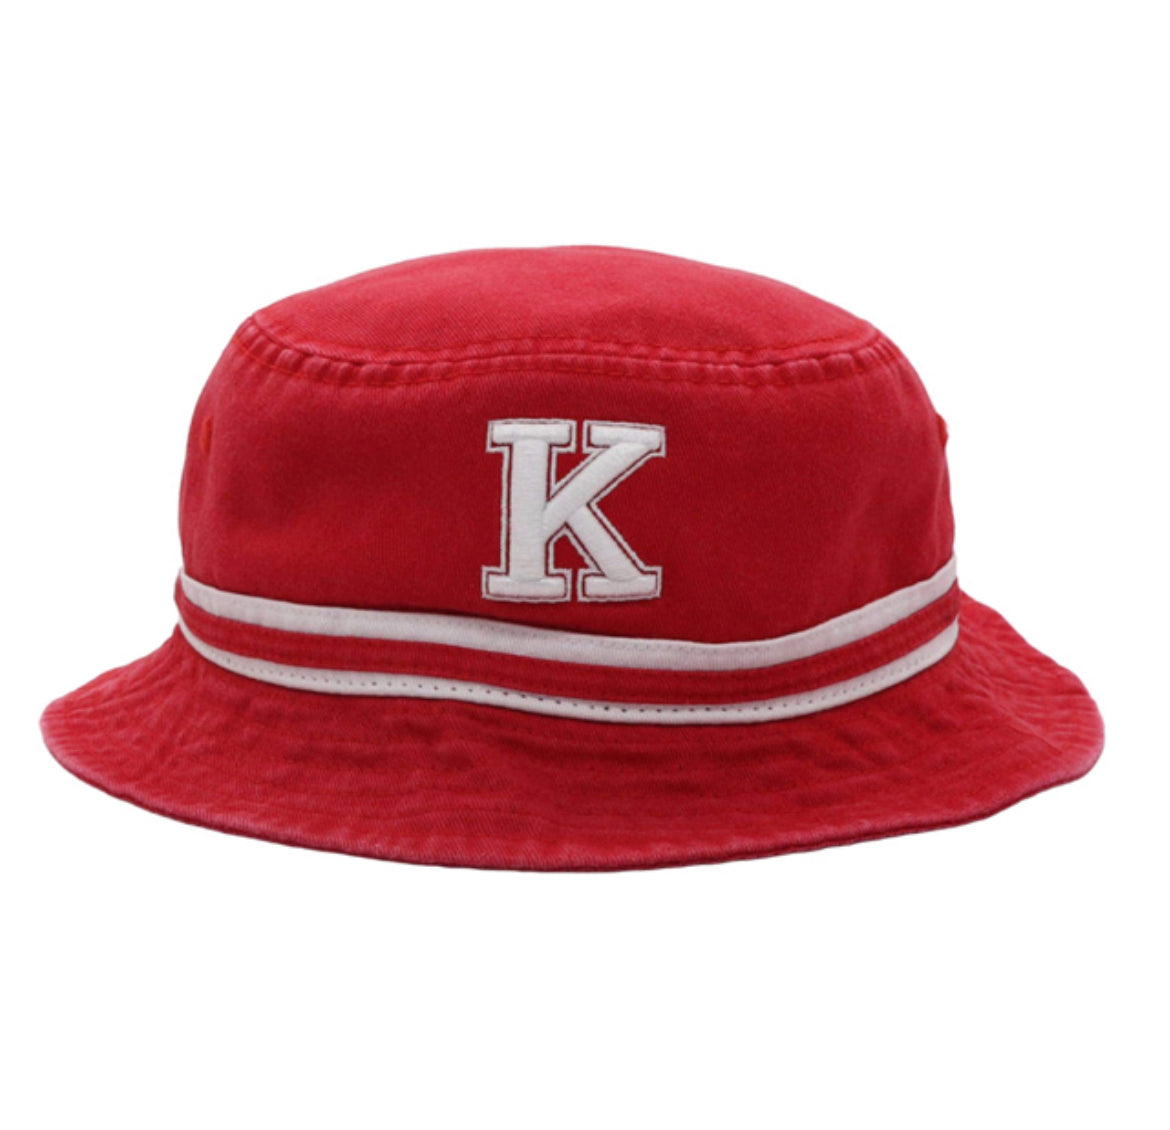 Get ready to show off your Kappa Alpha Psi pride with this stylish "Big K" bucket hat. Perfect for any Fraternity event, this hat is made for the ultimate Kappa Alpha Psi member. Representing the Fraternal Organization with style, this collectible item is a must-have for any true member of the fraternity .